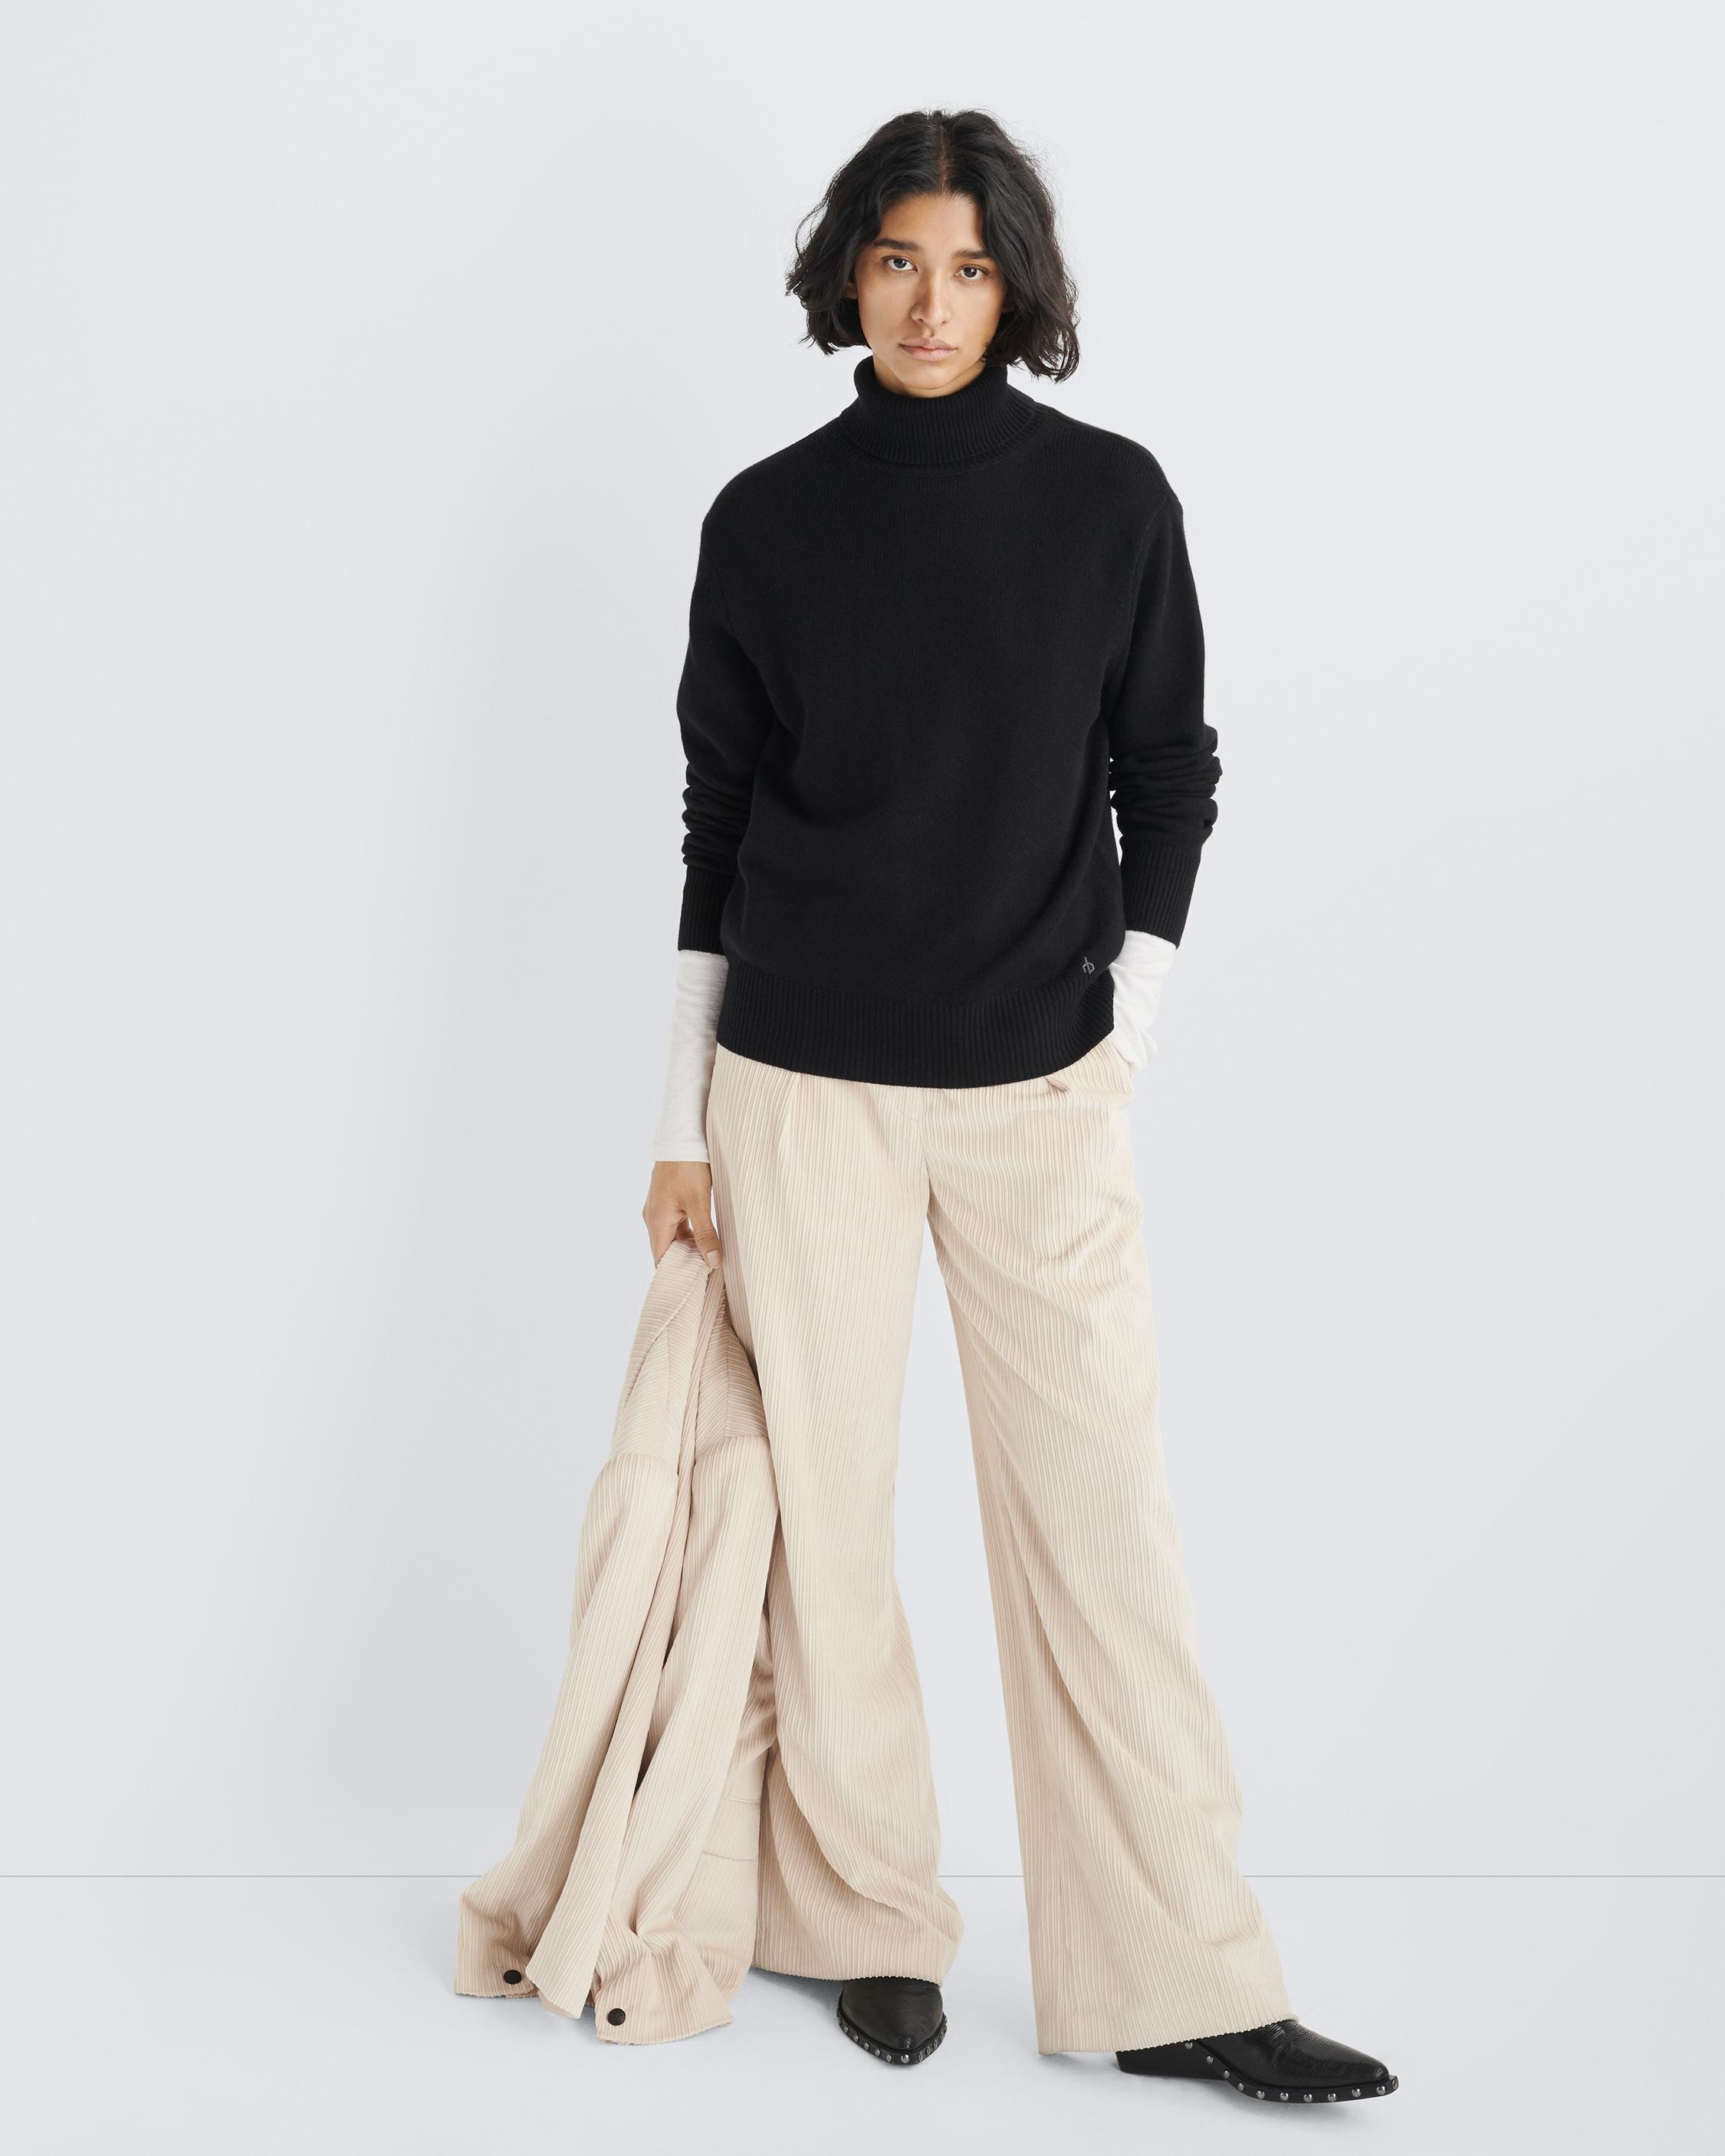 Talan Cashmere Turtleneck
Relaxed Fit - 6